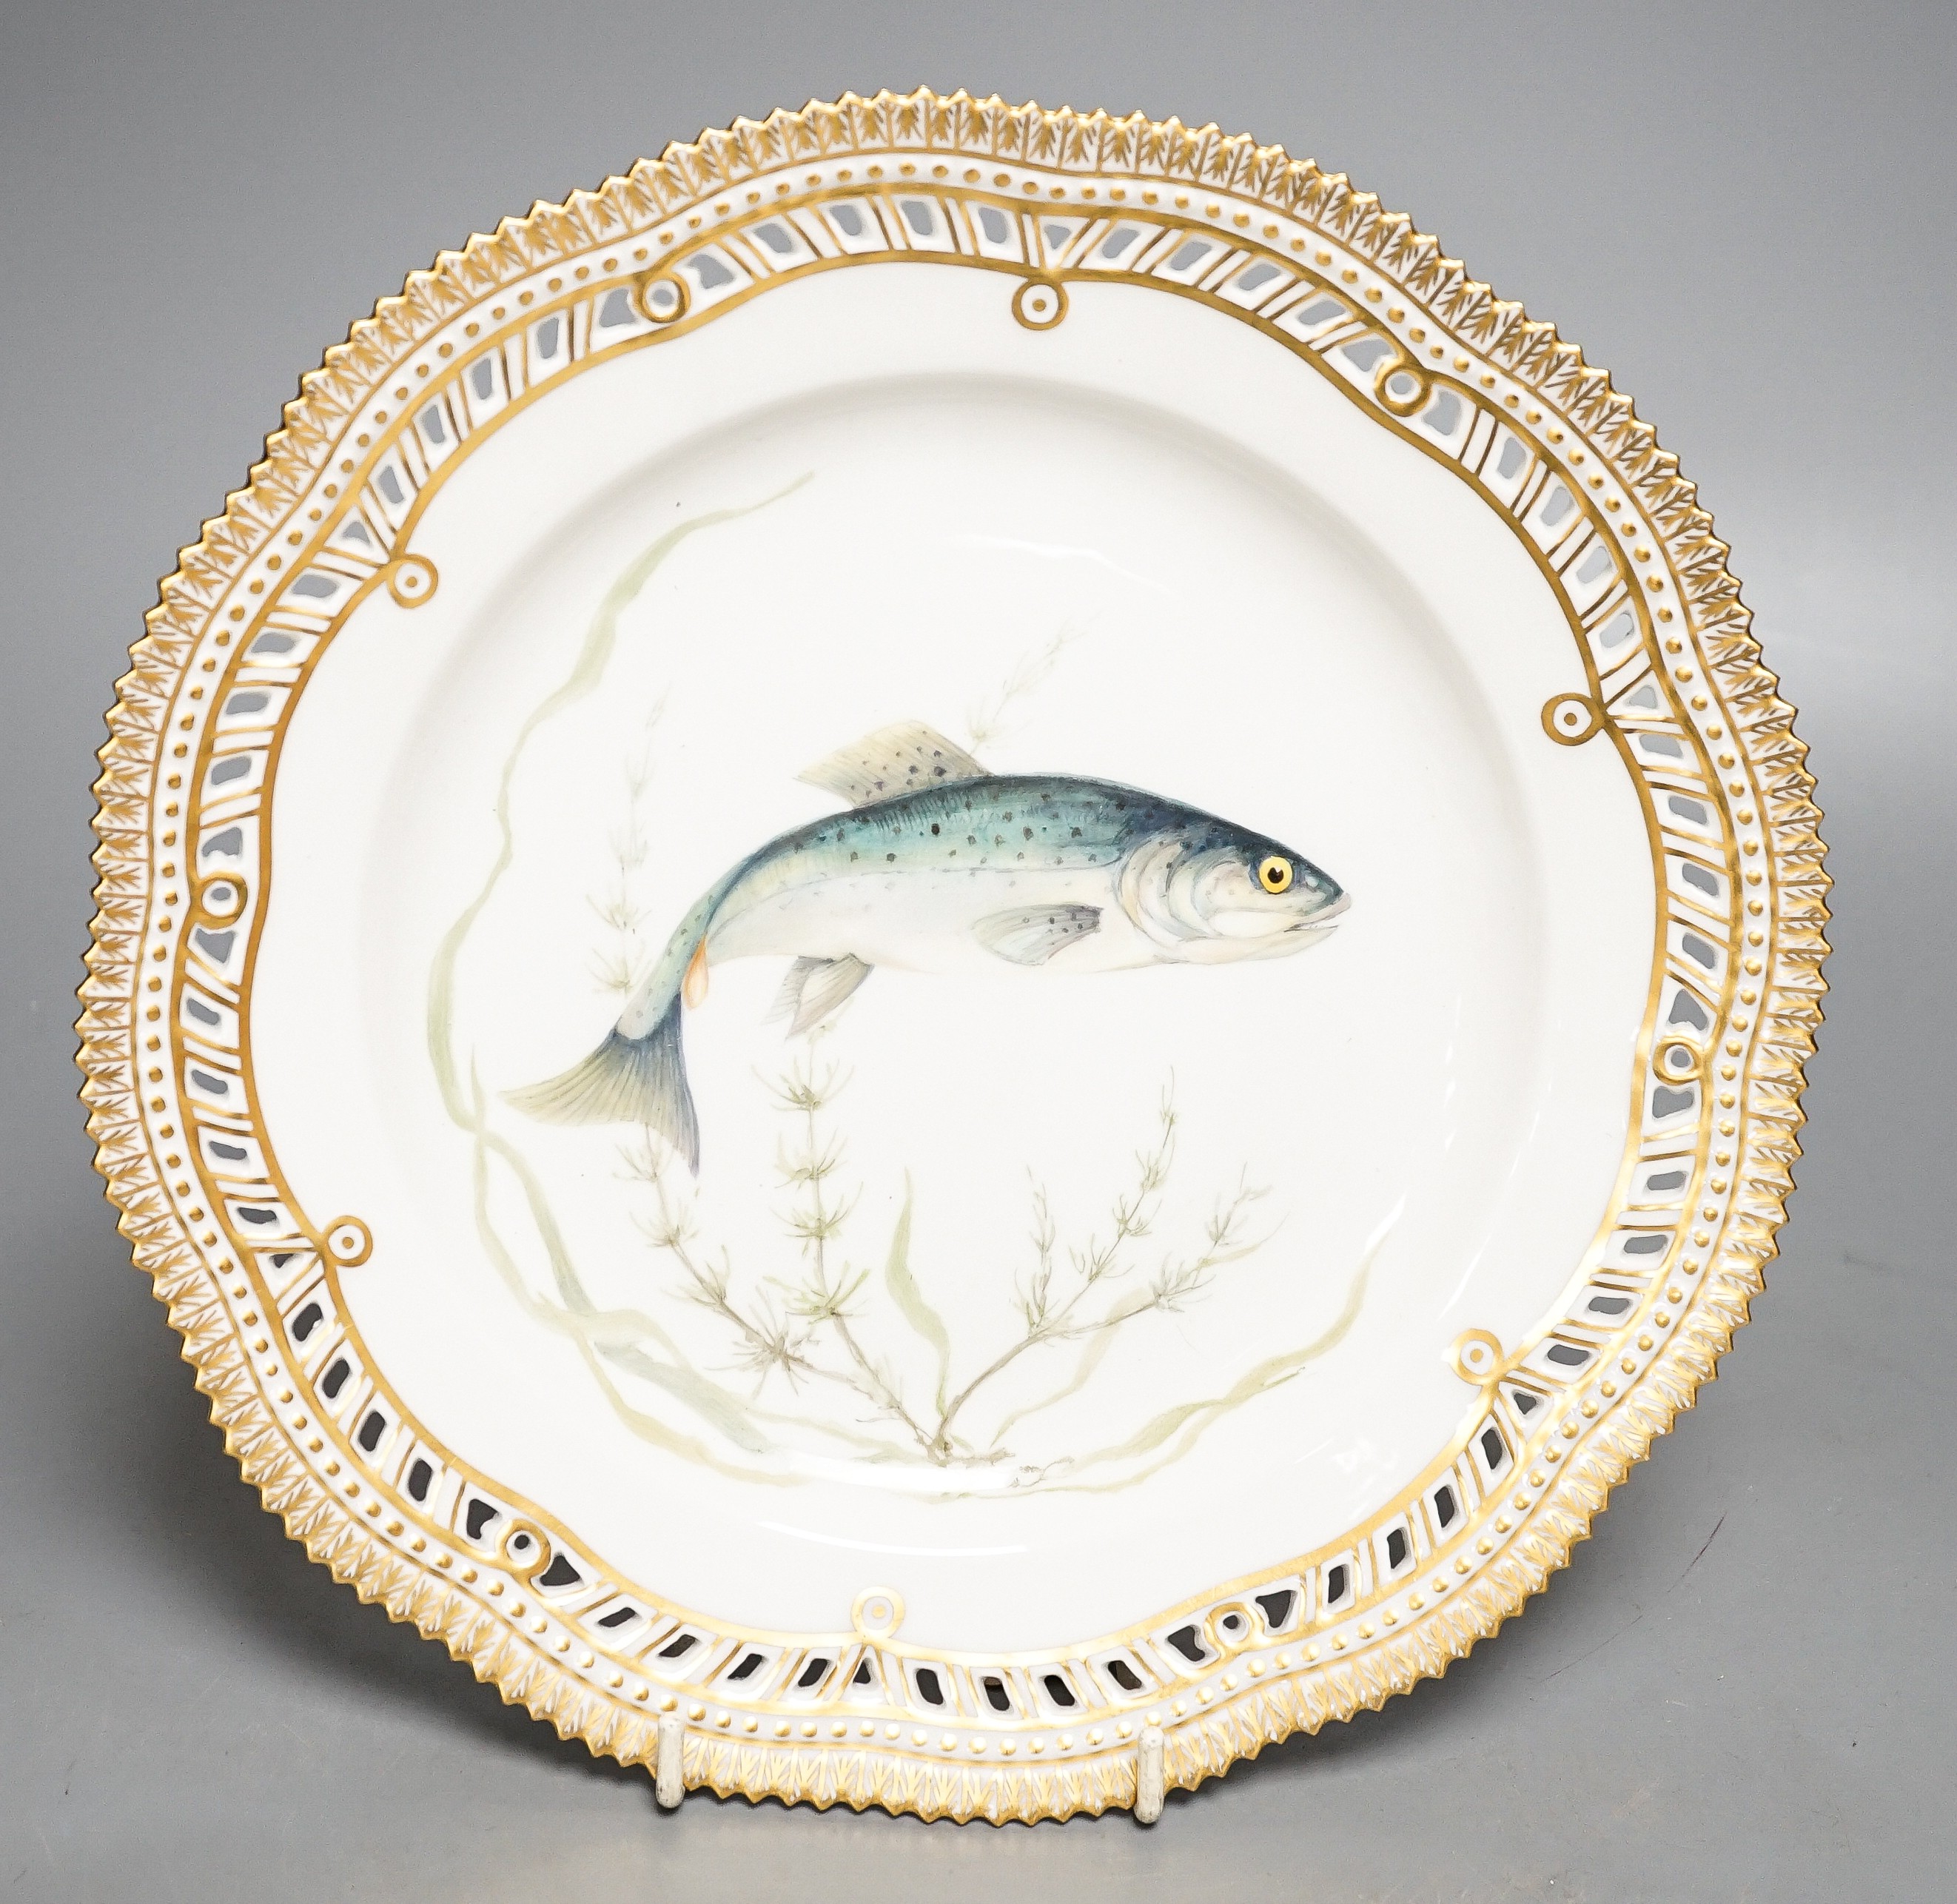 A Royal Copenhagen Fauna Danica fish plate, date code for 1957, painted with 